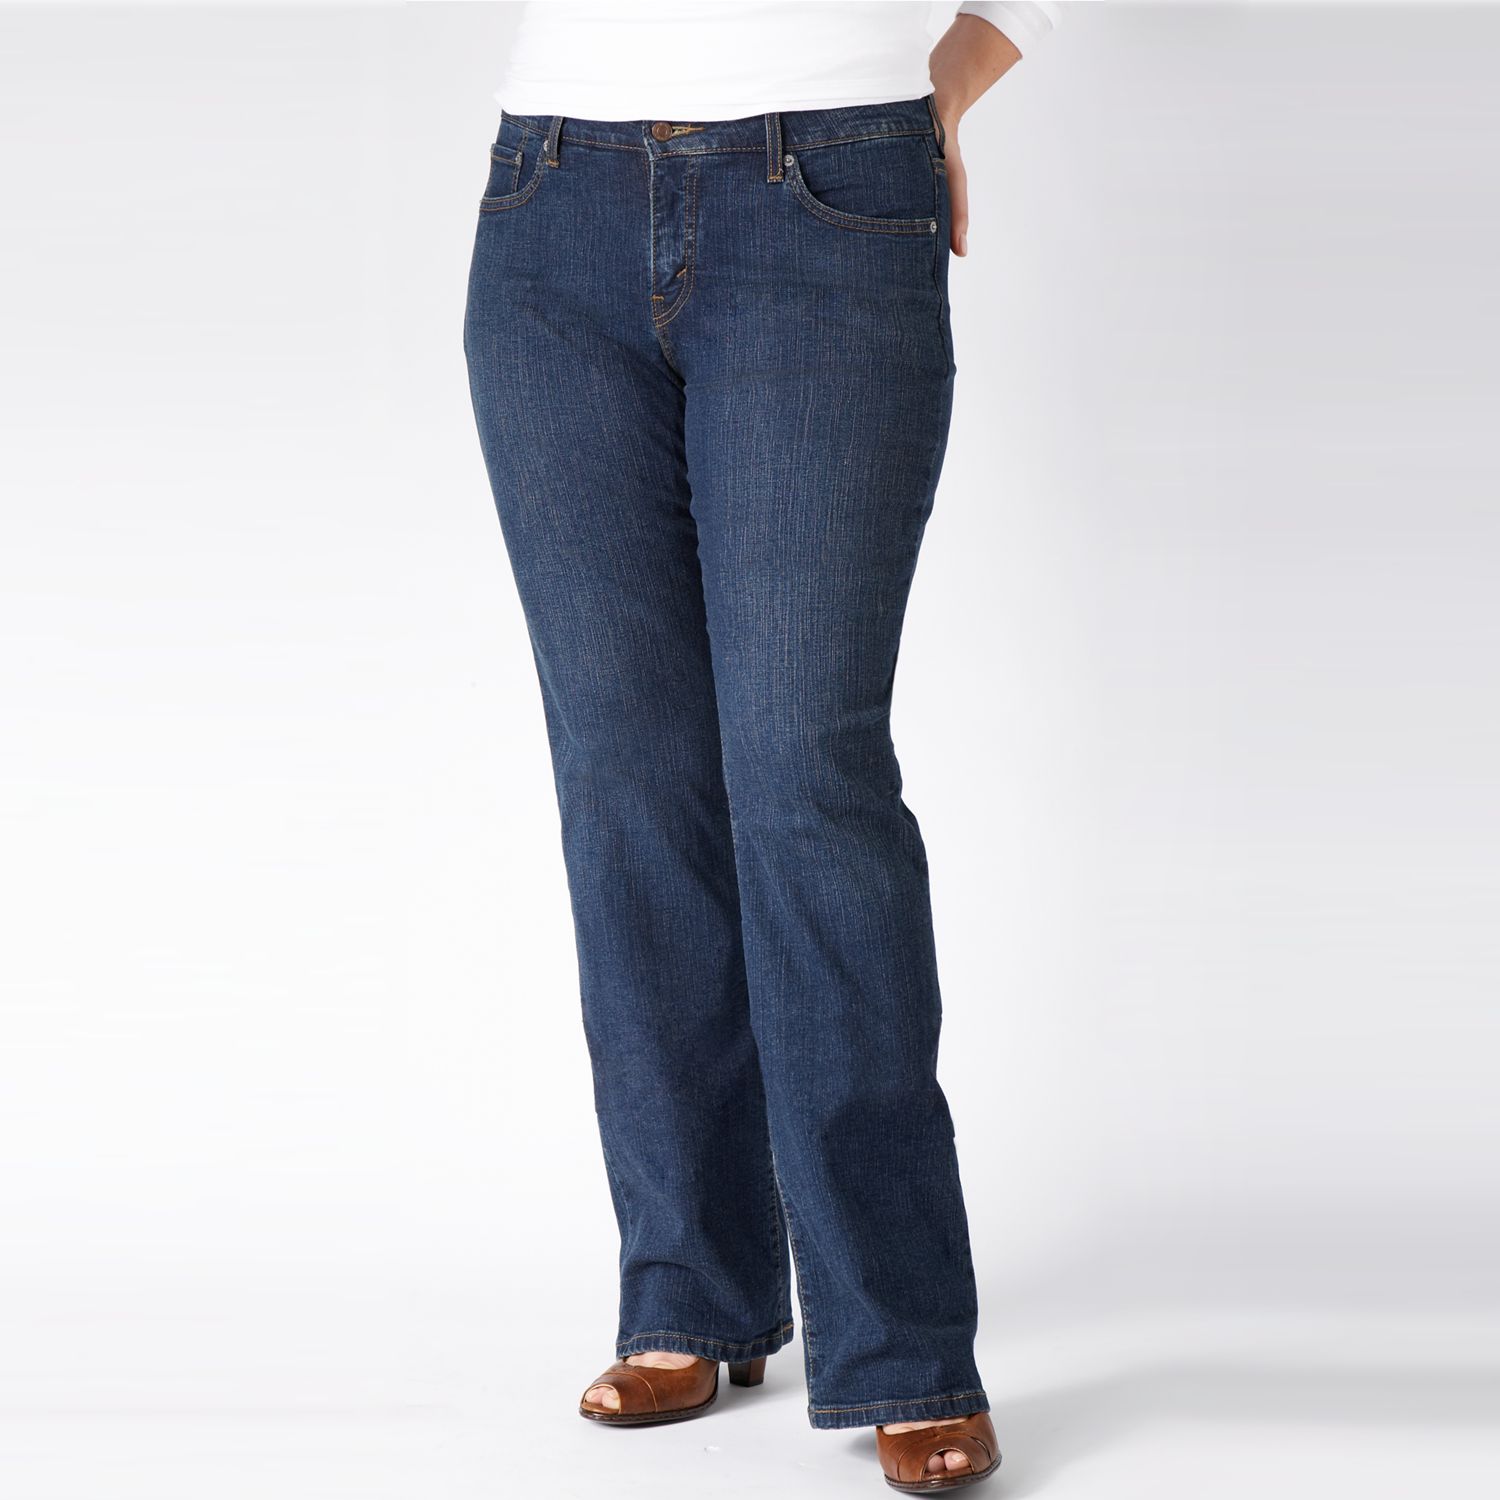 levi's slimming bootcut jeans